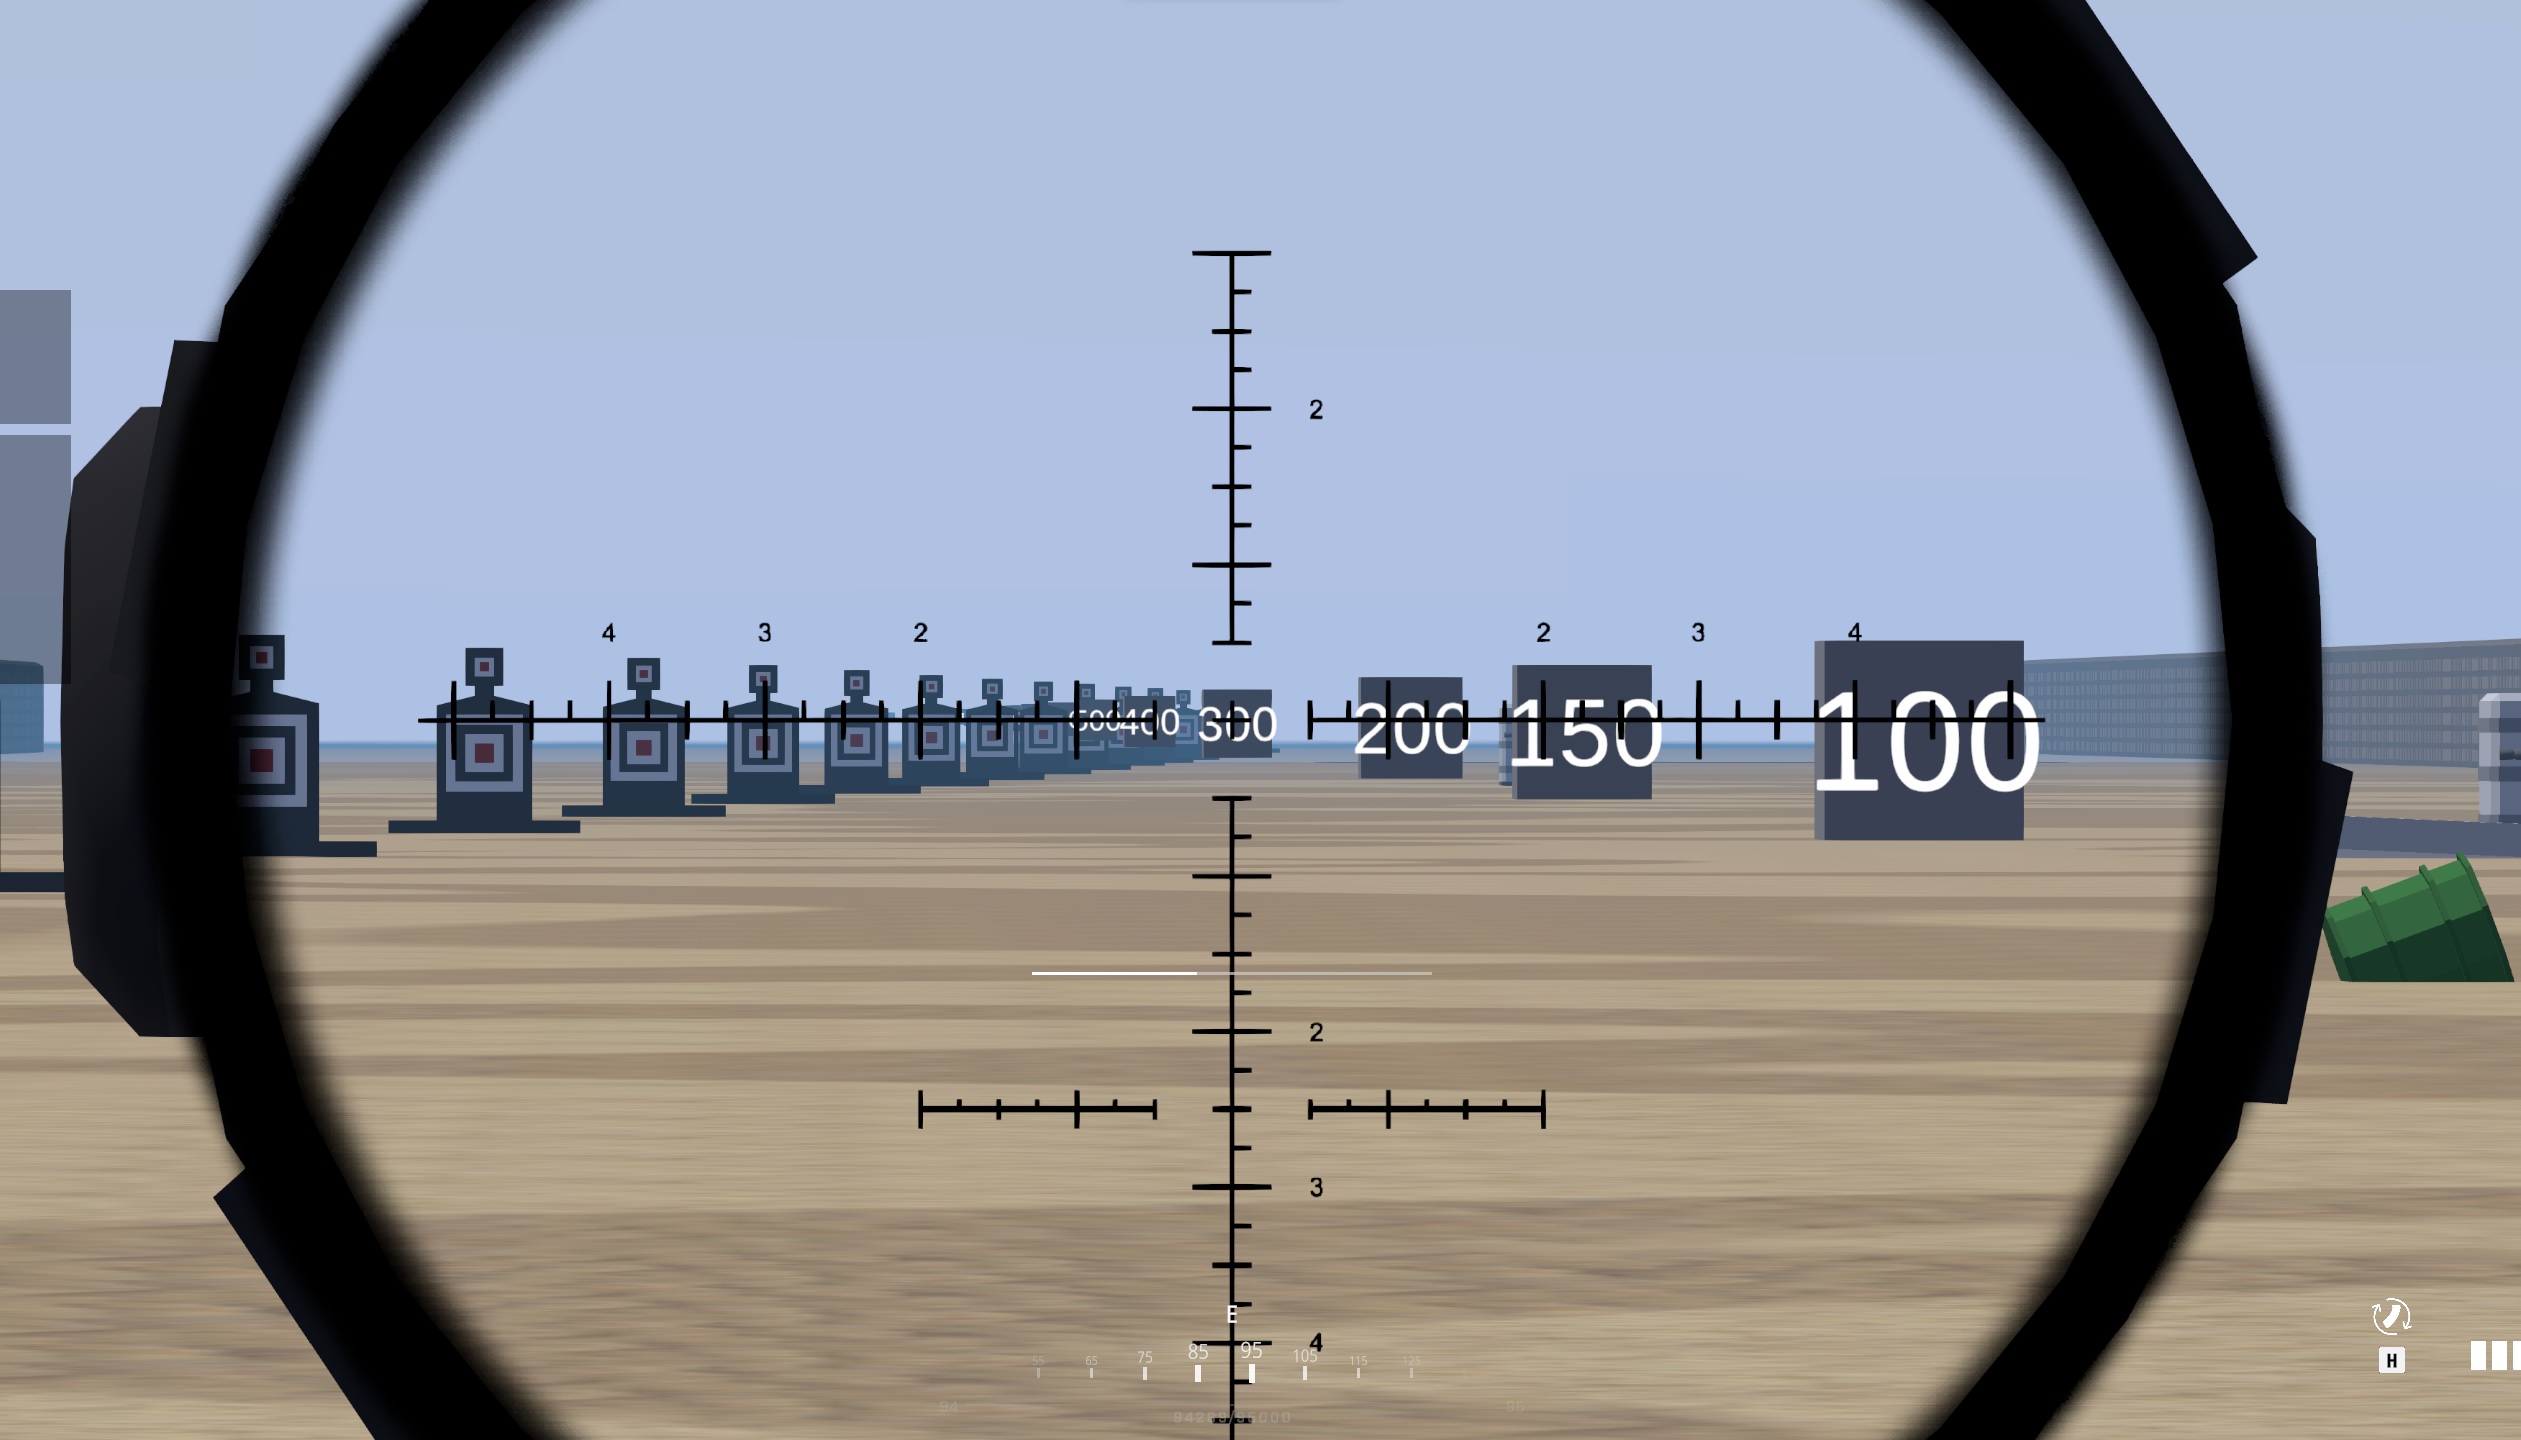 BattleBit Remastered - Sights and scopes information guide - 15x - C736E1C